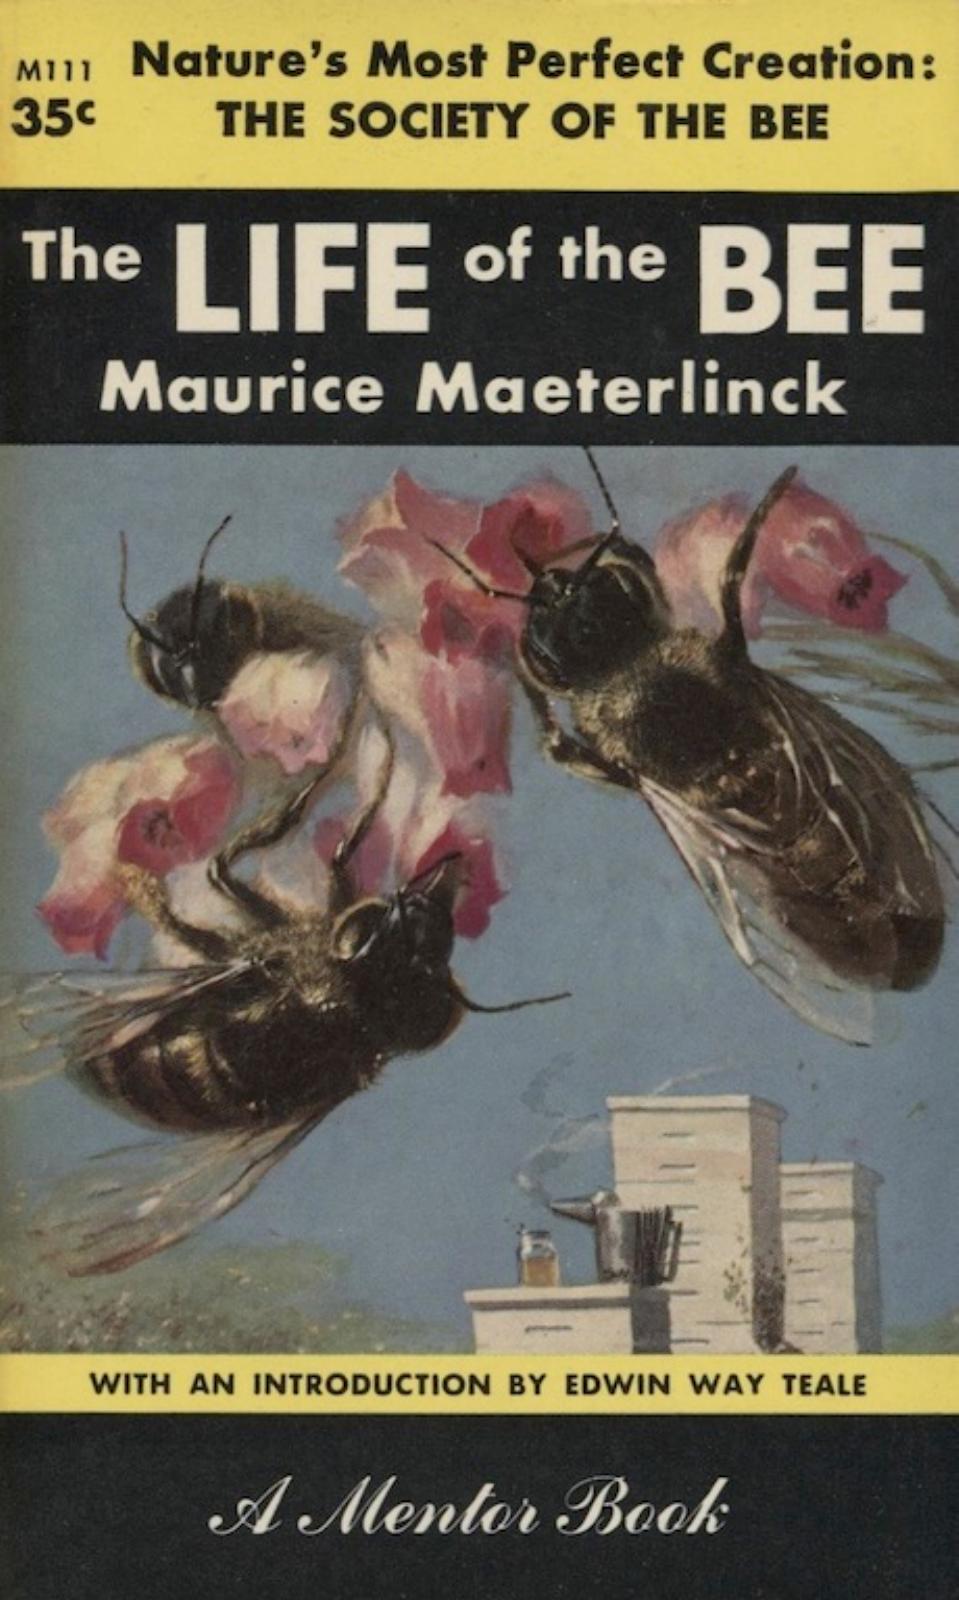 The Life of the Bee by Maurice Maeterlinck